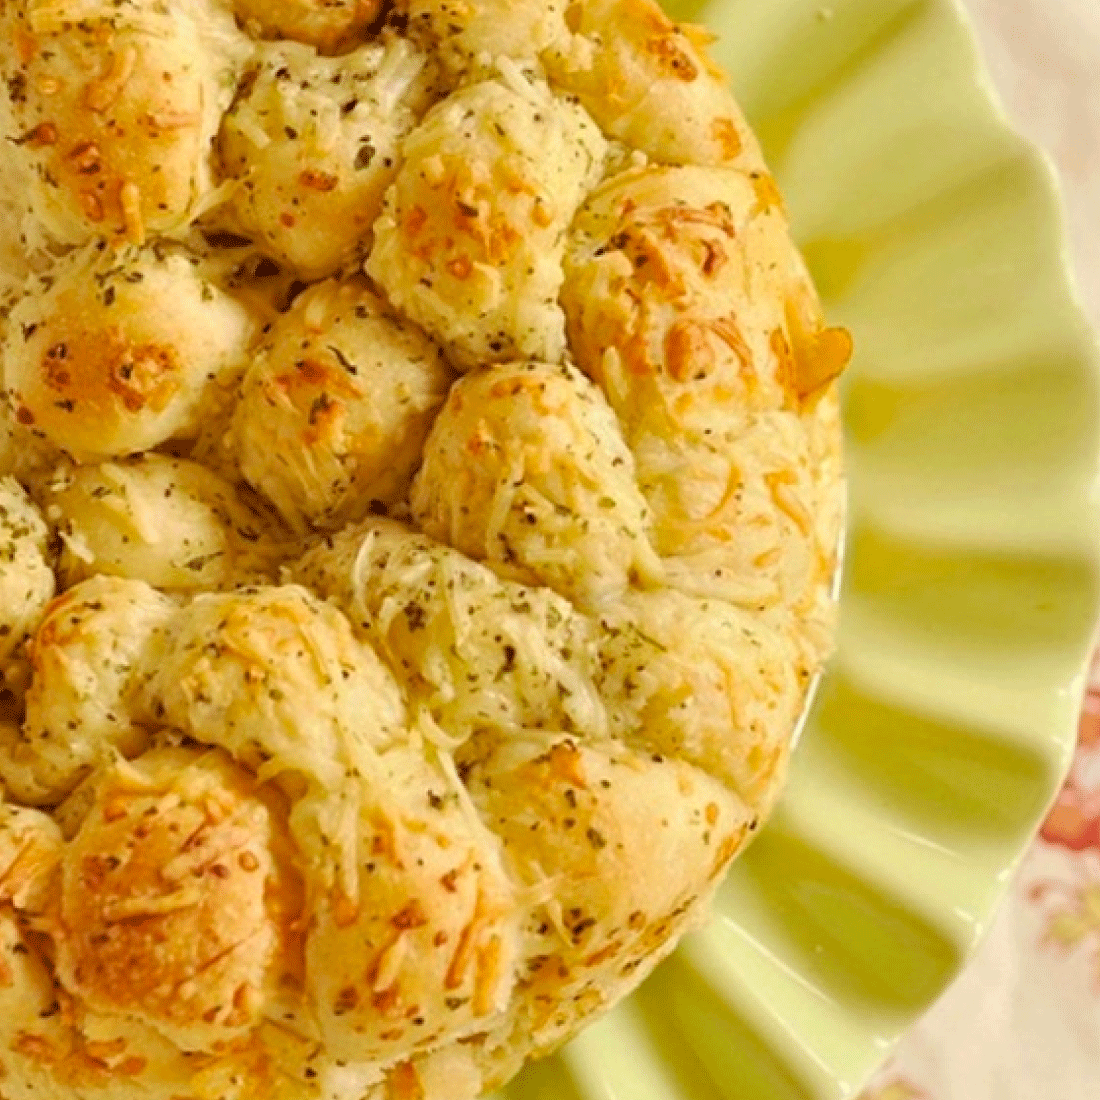 Appetizer Recipes - a round up of the very best. Featuring garlic cheese bread